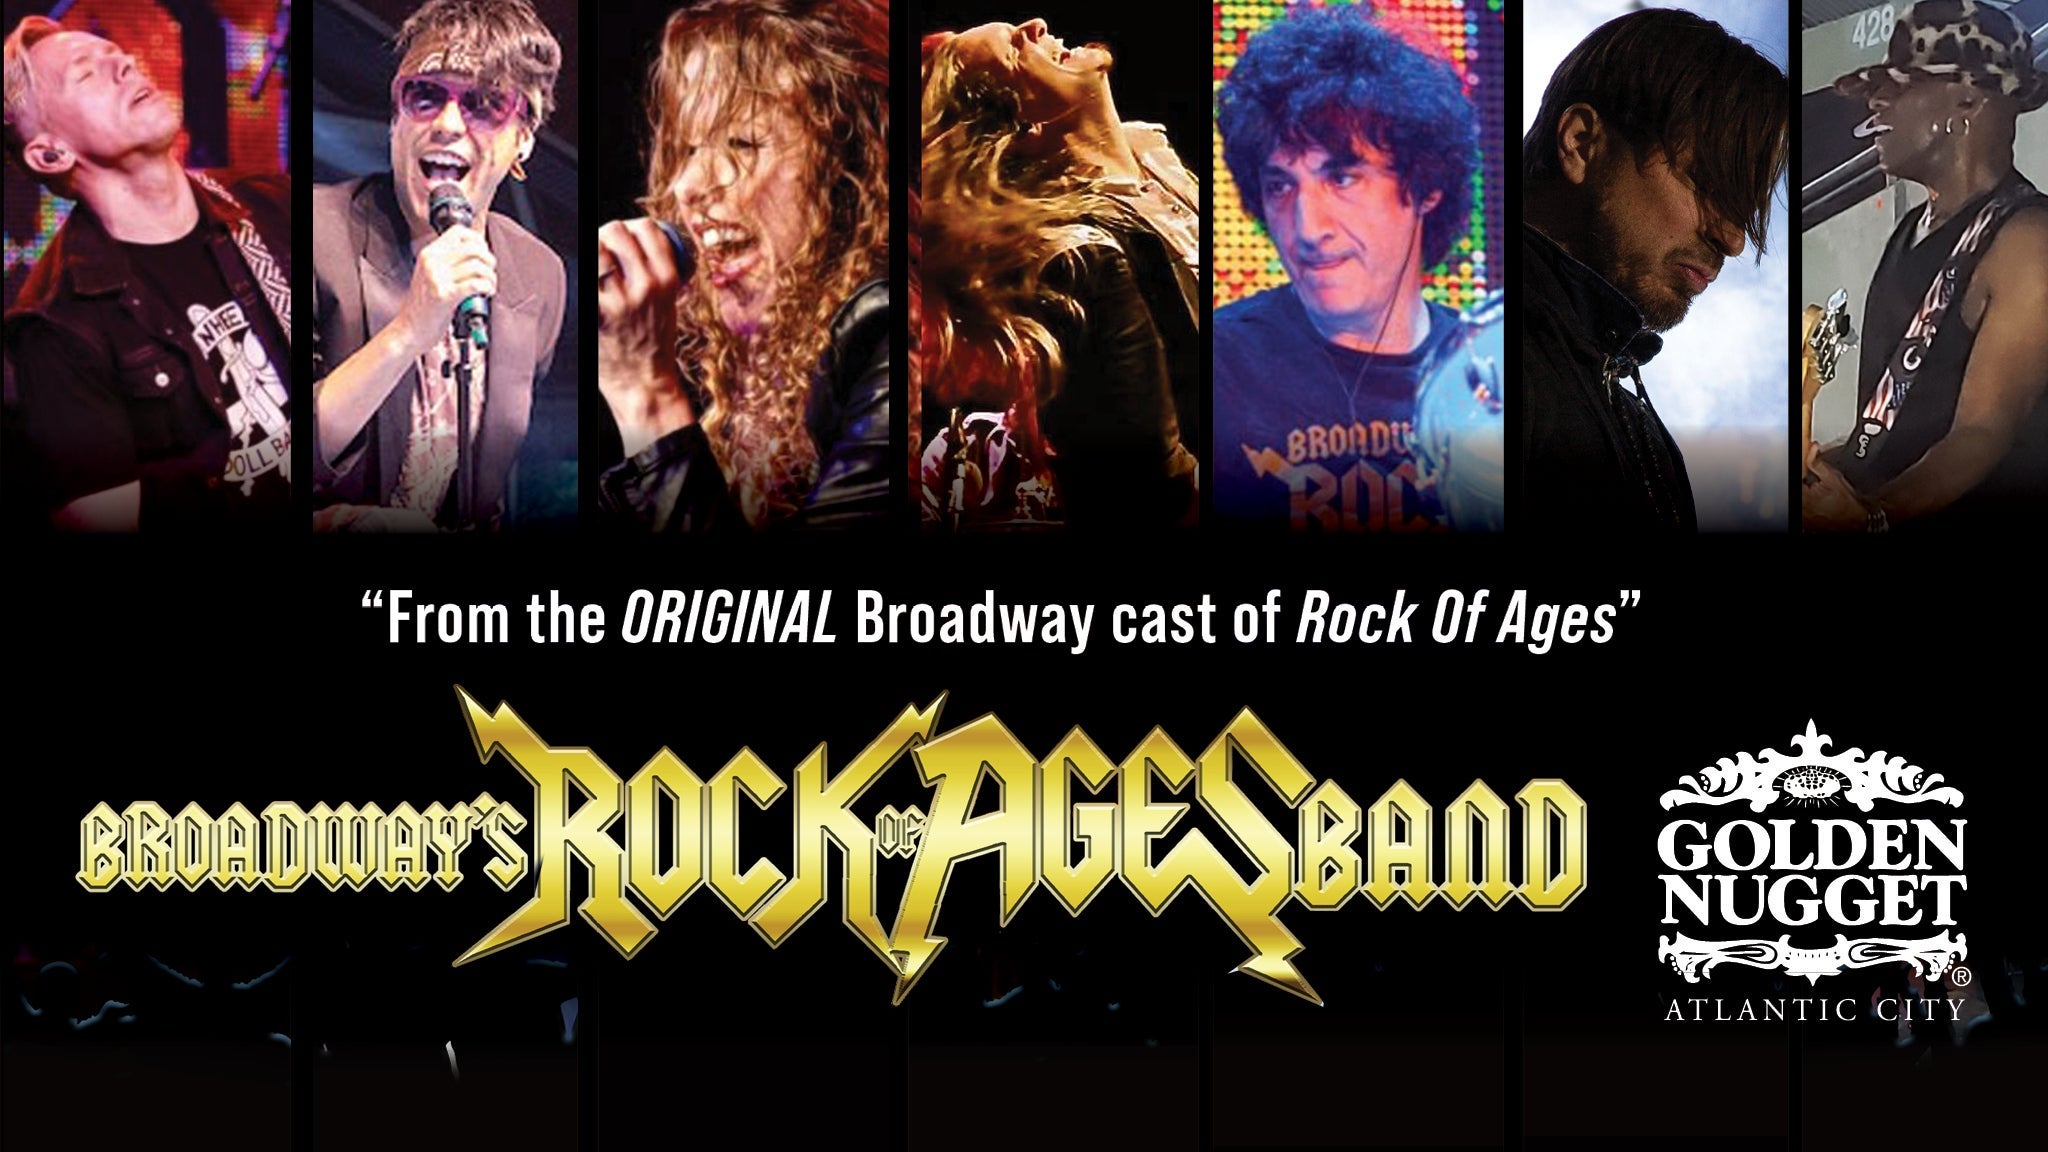 Rock of Ages Band in Atlantic City promo photo for Exclusive presale offer code